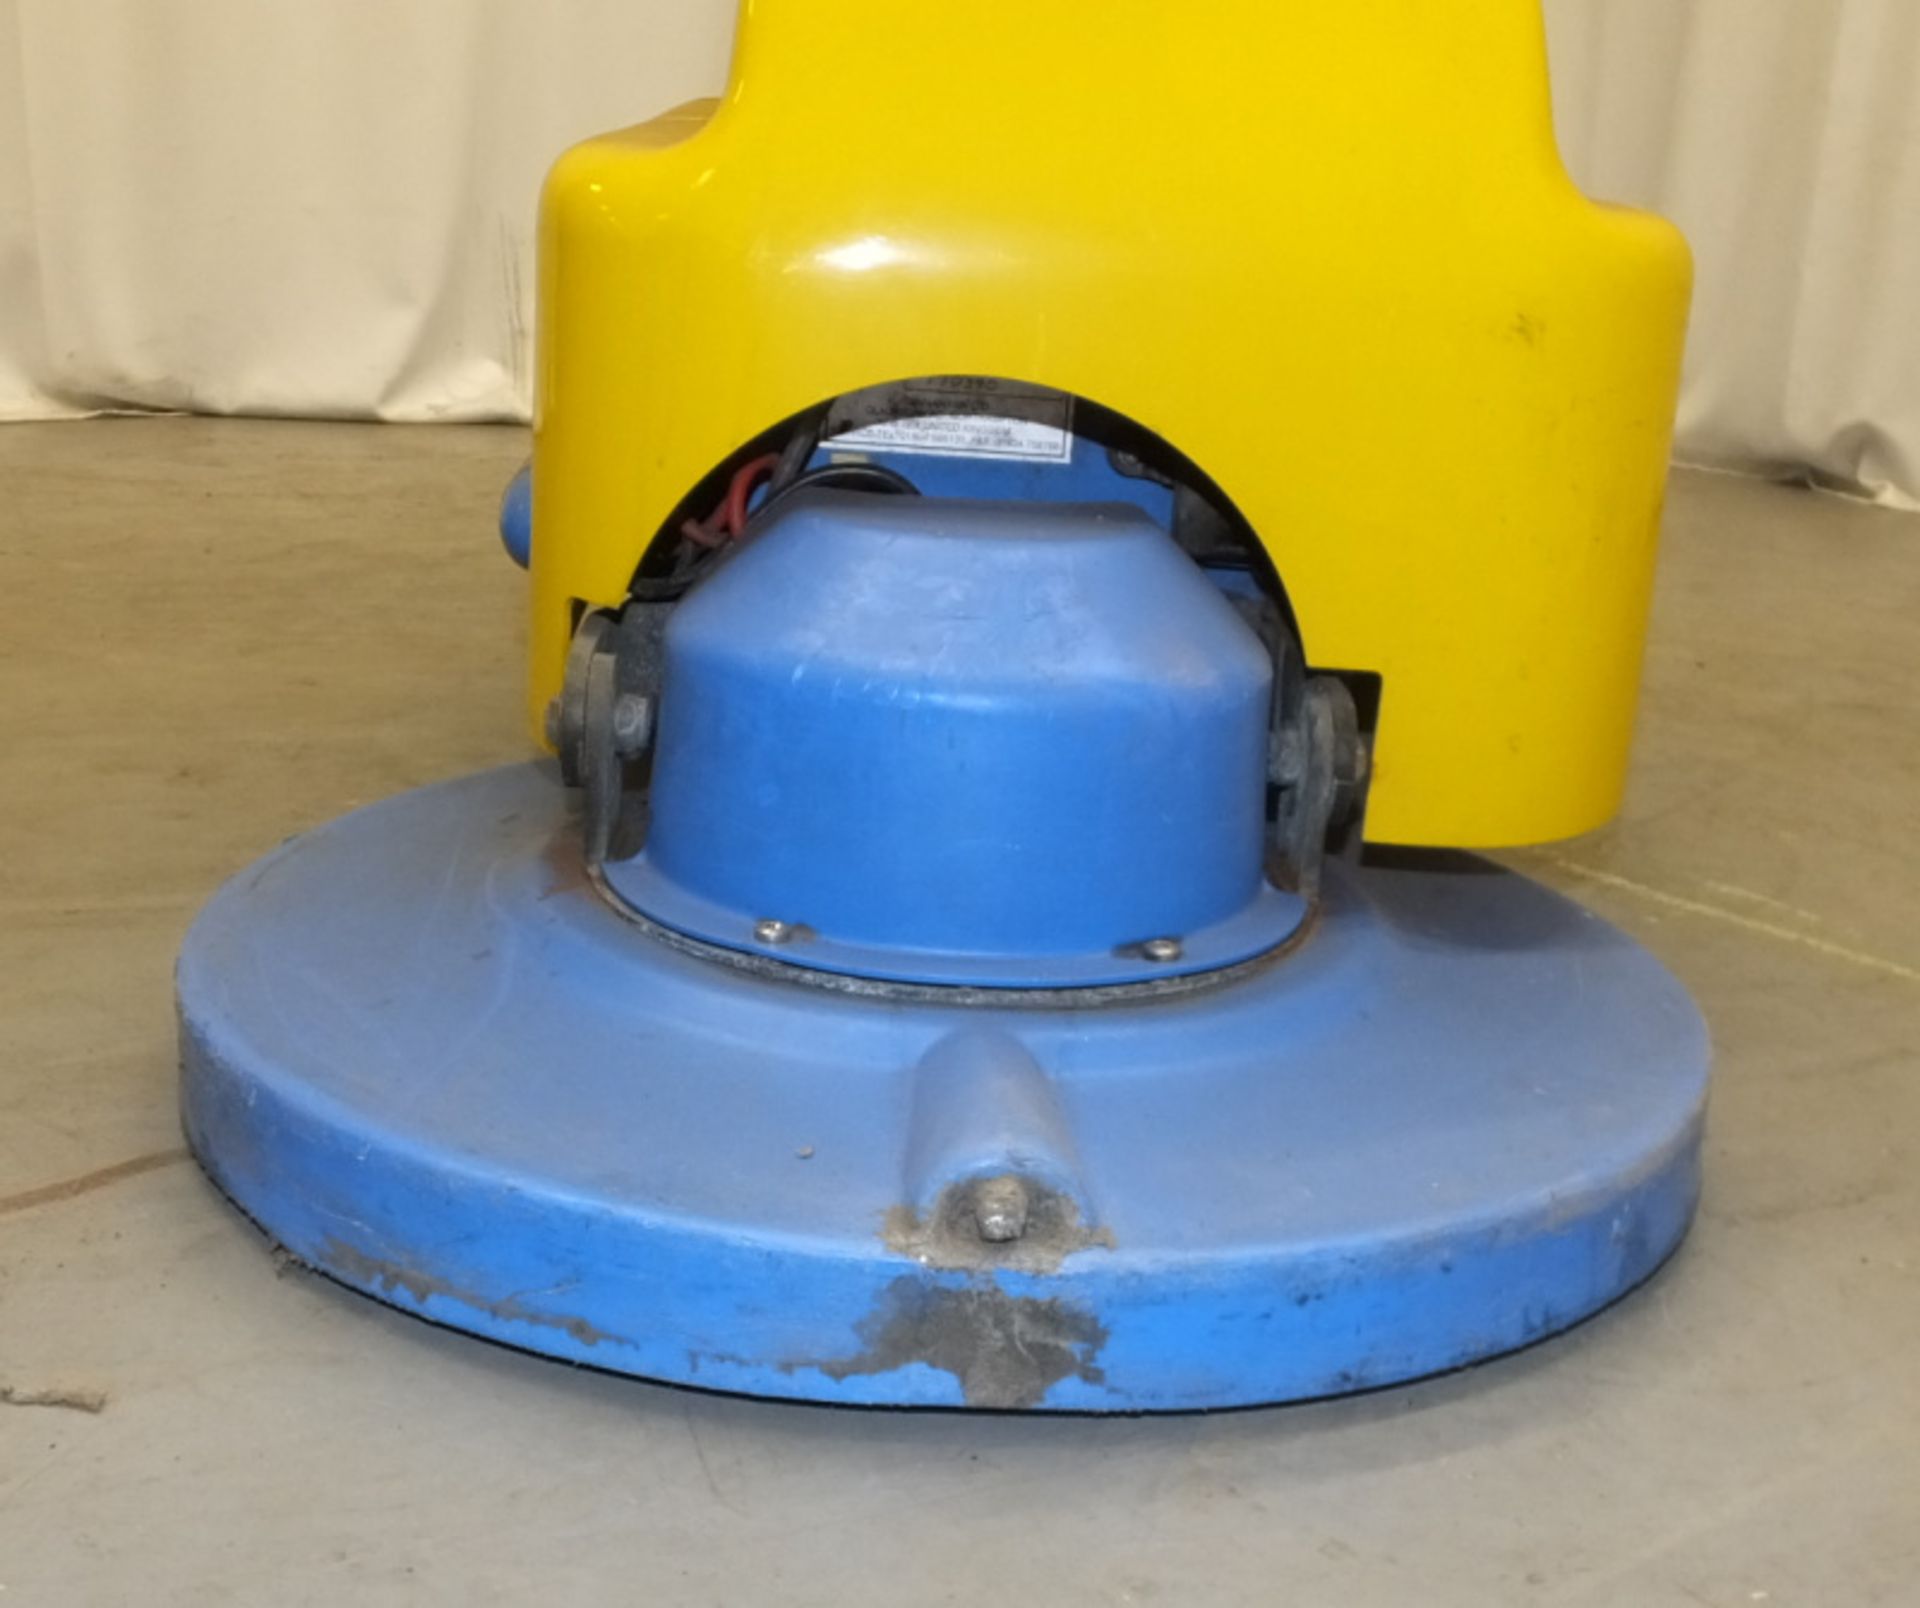 Tennant Challenger Nippy 500 Walk-Behind Floor Cleaner - no key - cracked casing as seen in pictures - Image 3 of 9